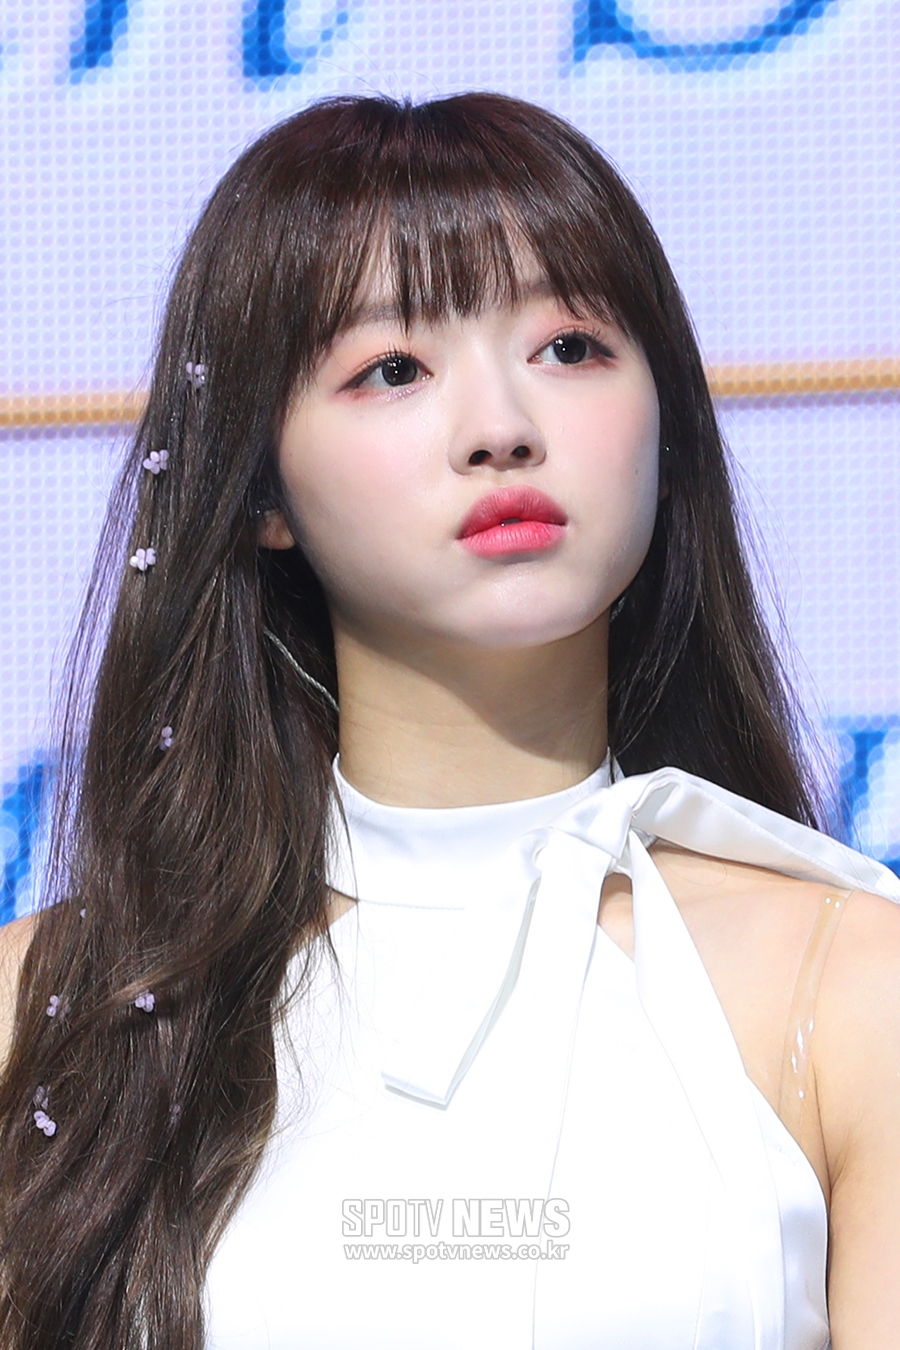 The showcase for the release of the first regular album The Fifth Season of the girl group OH MY GIRL was held at K Art Hall in Olympic Park, Bangi-dong, Songpa-gu, Seoul on the afternoon of the 8th.OH MY GIRL YooA is thoughtful.